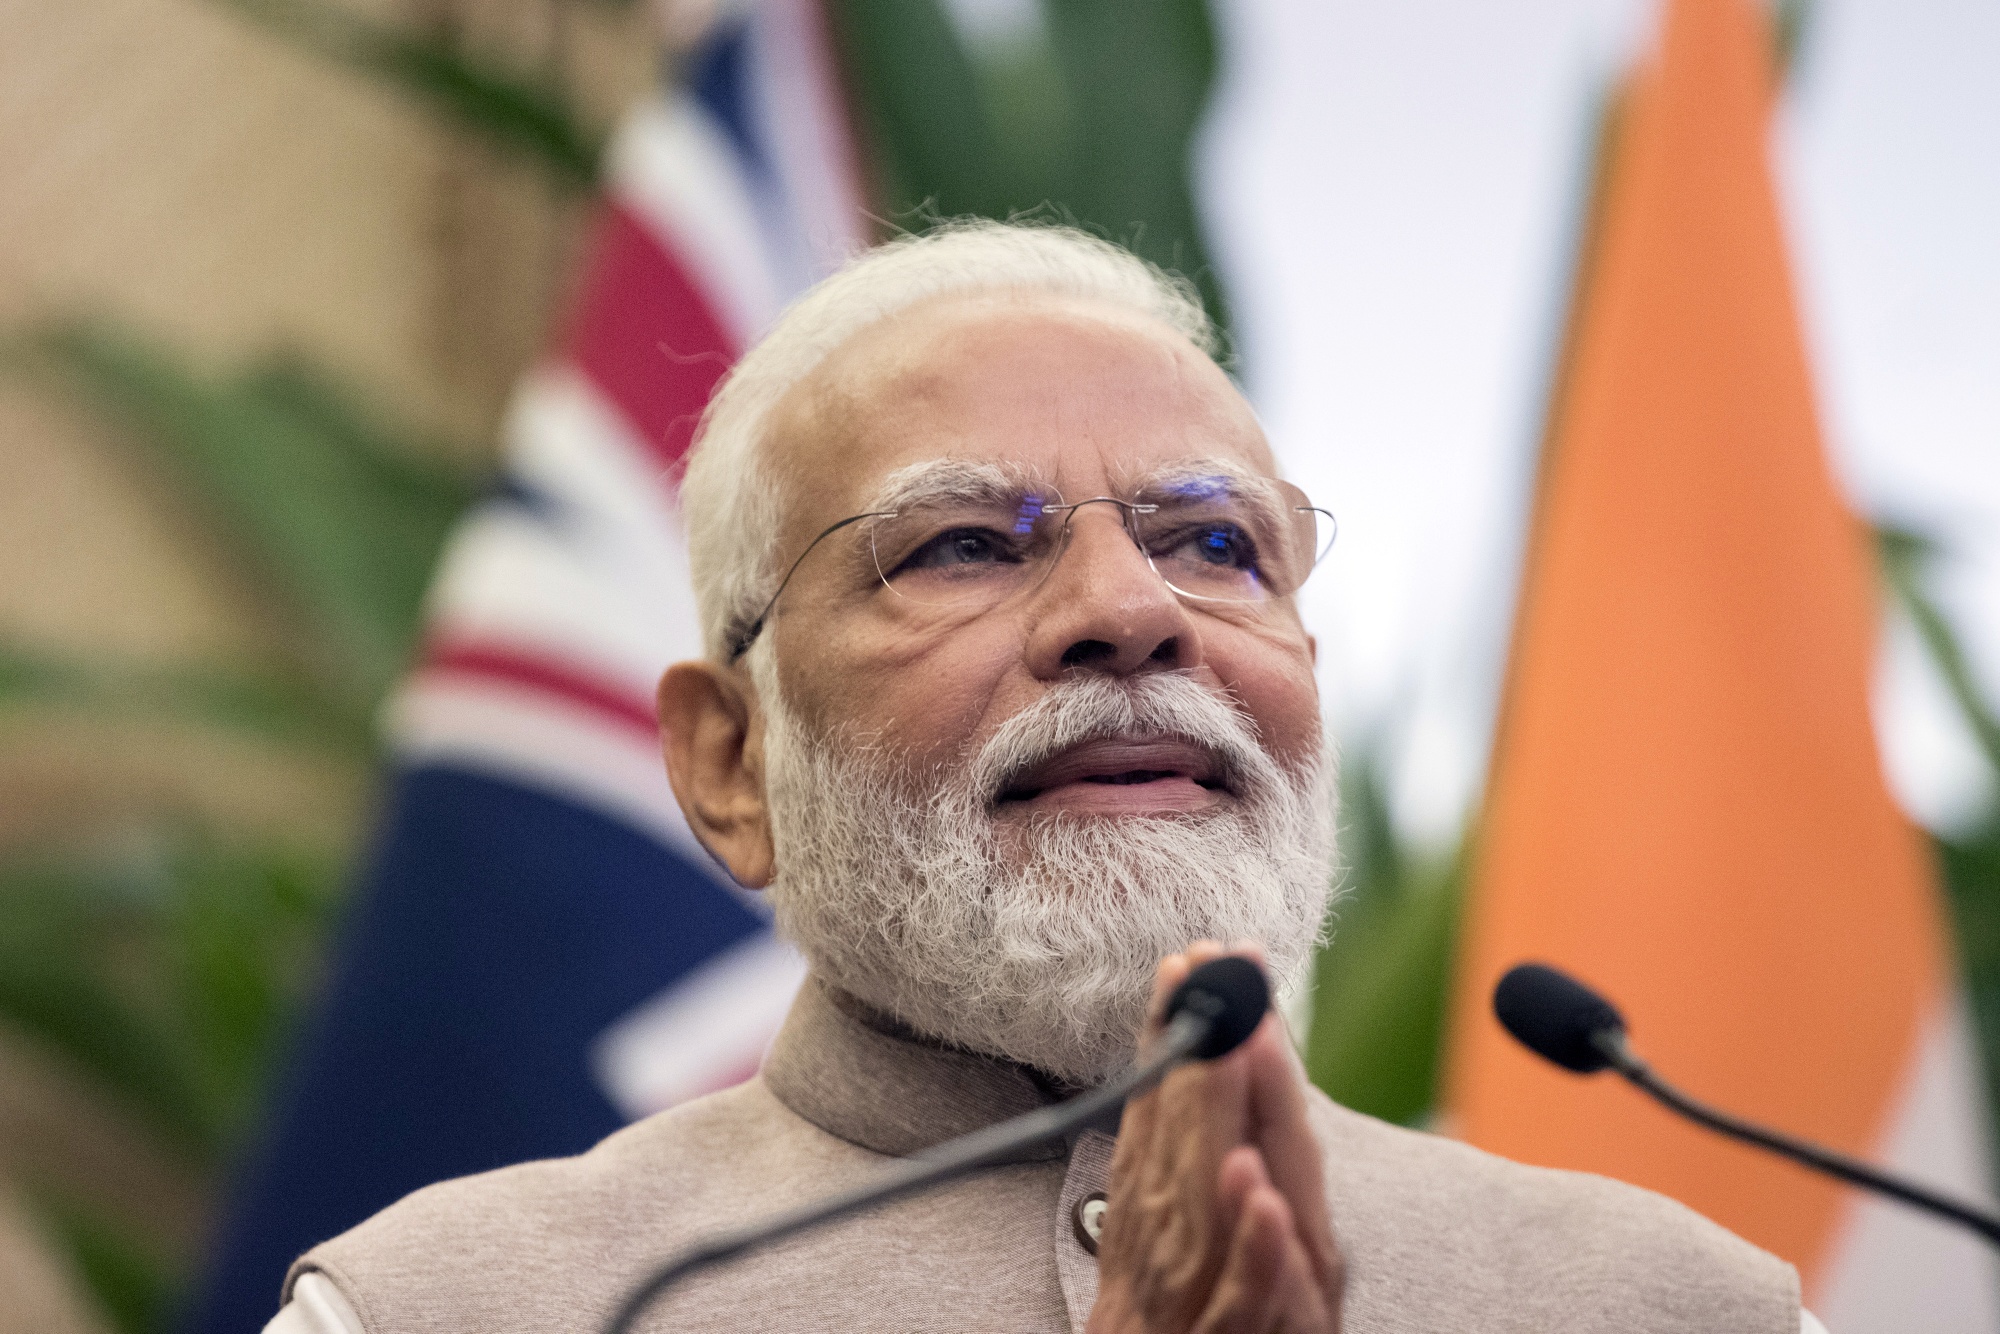 Narendra Modi during a visit to Sydney, Australia, on May 24.